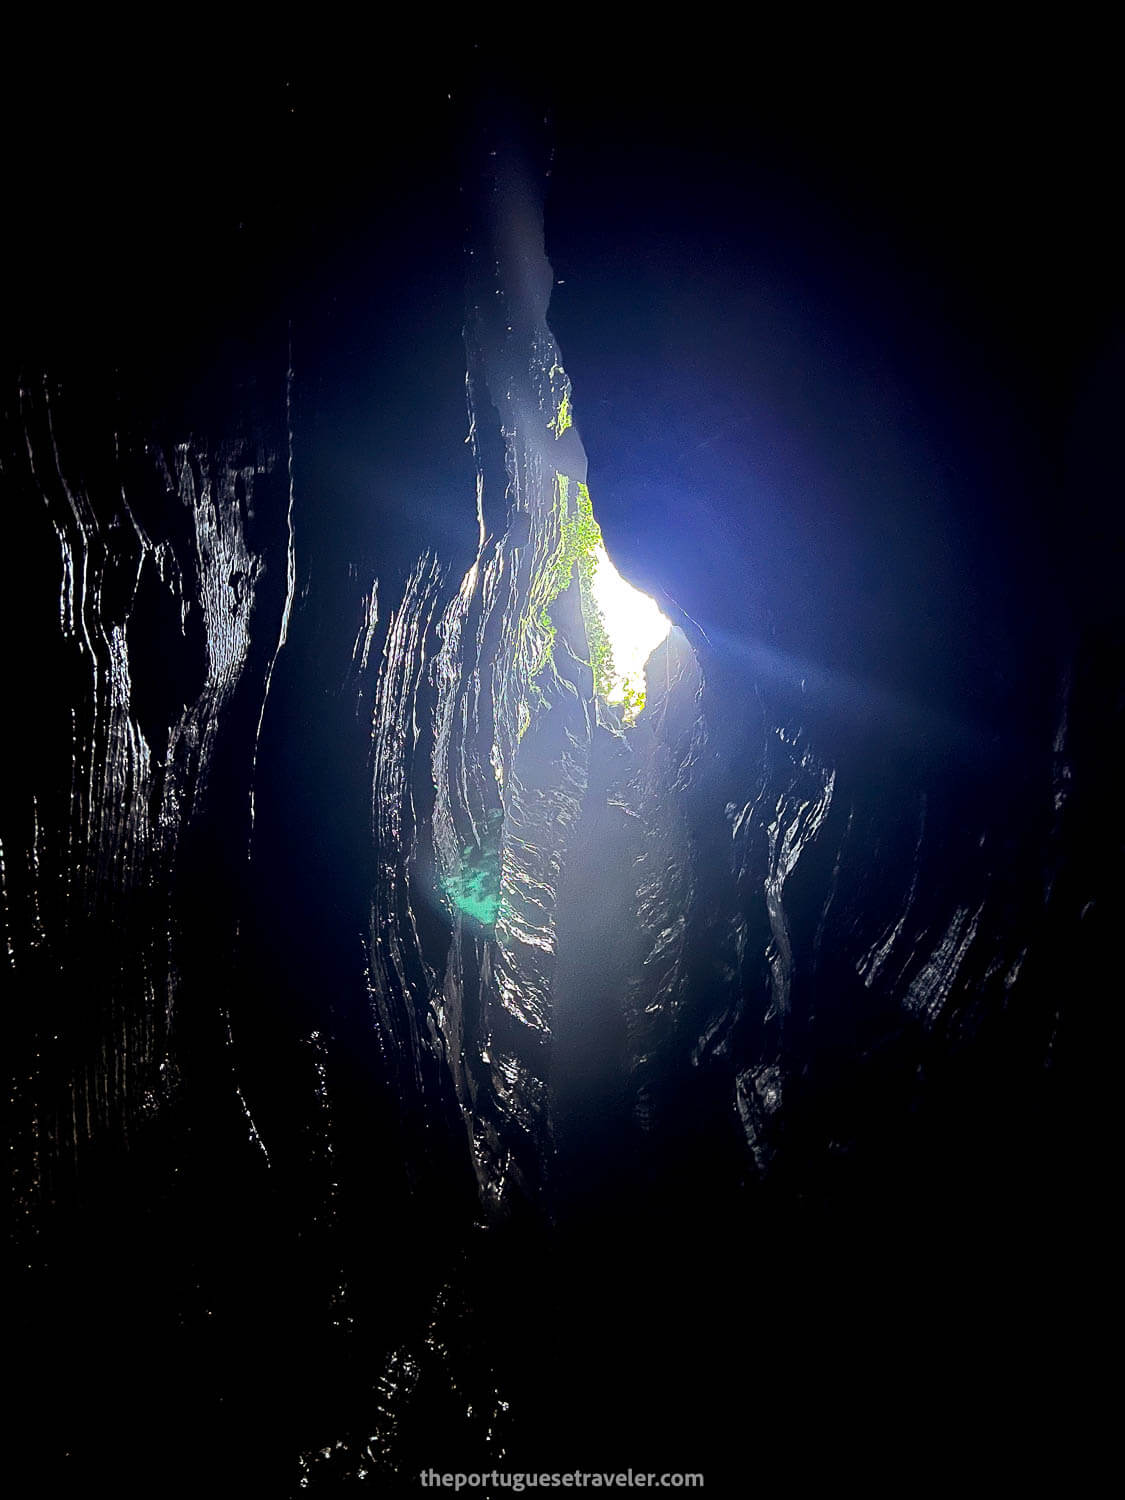 The view up from inside the cave, on the Cueva de Los Tayos expedition.